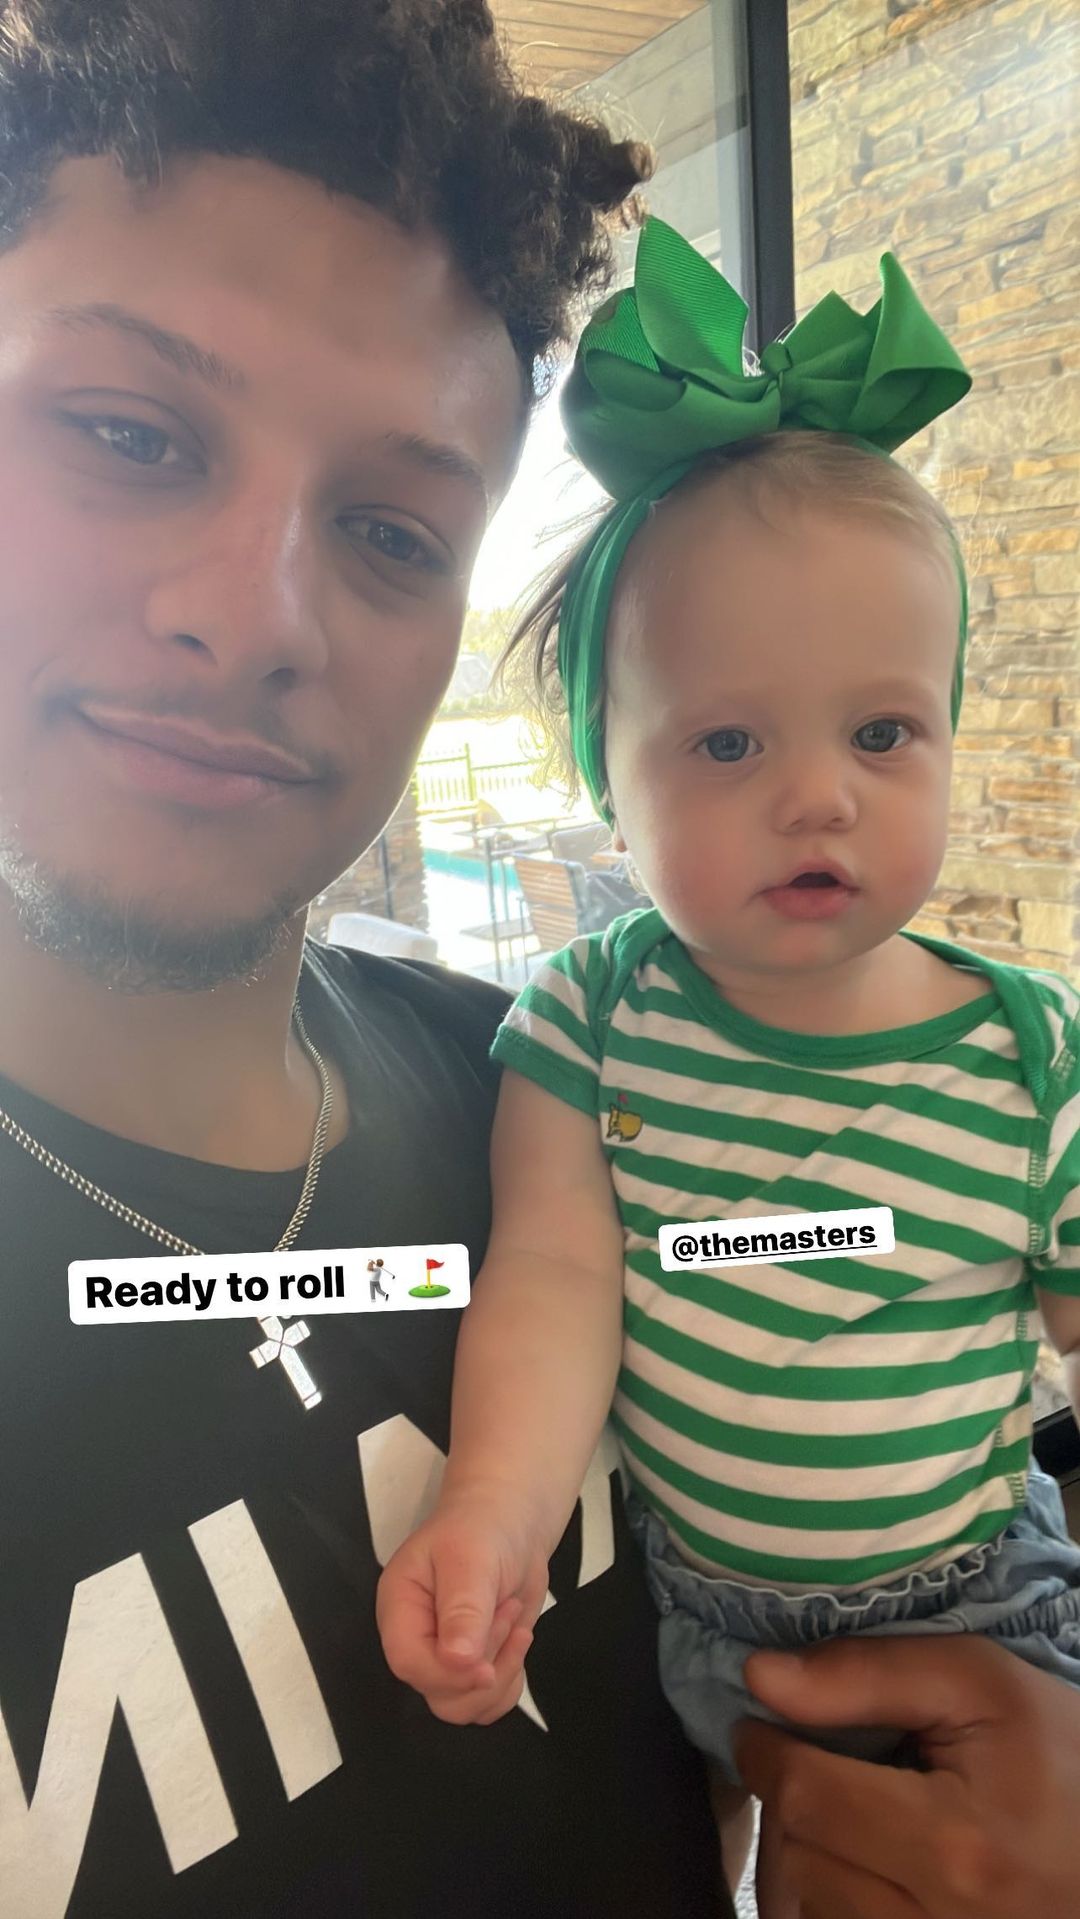 Patrick Mahomes' fiancée Brittany Matthews shares adorable shot of daughter  Sterling